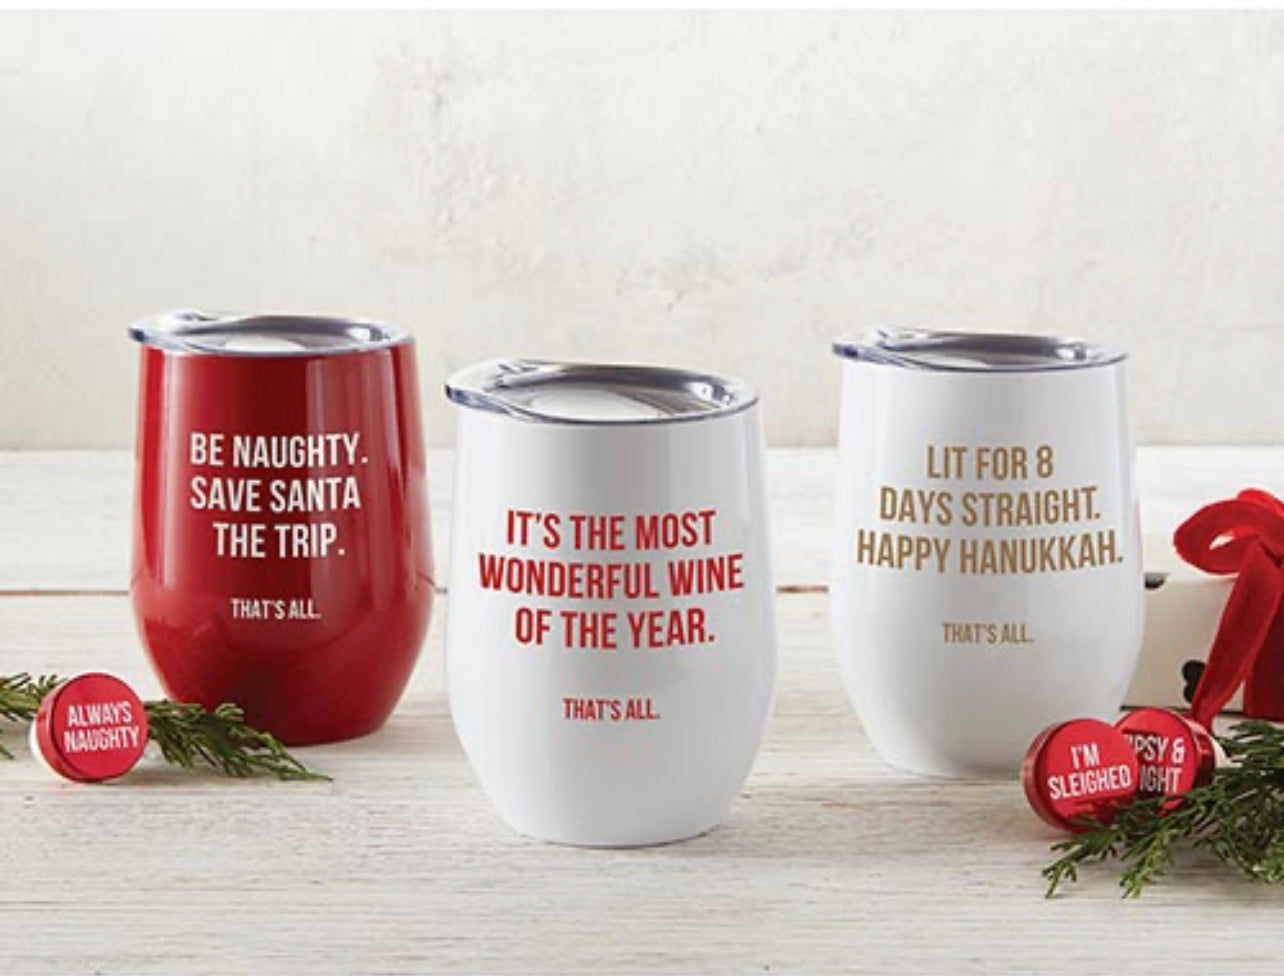 12 oz white christmas wine tumbler saying "It's the most wonderful wine of the year - that's all" displayed with other christmas wine tumblers